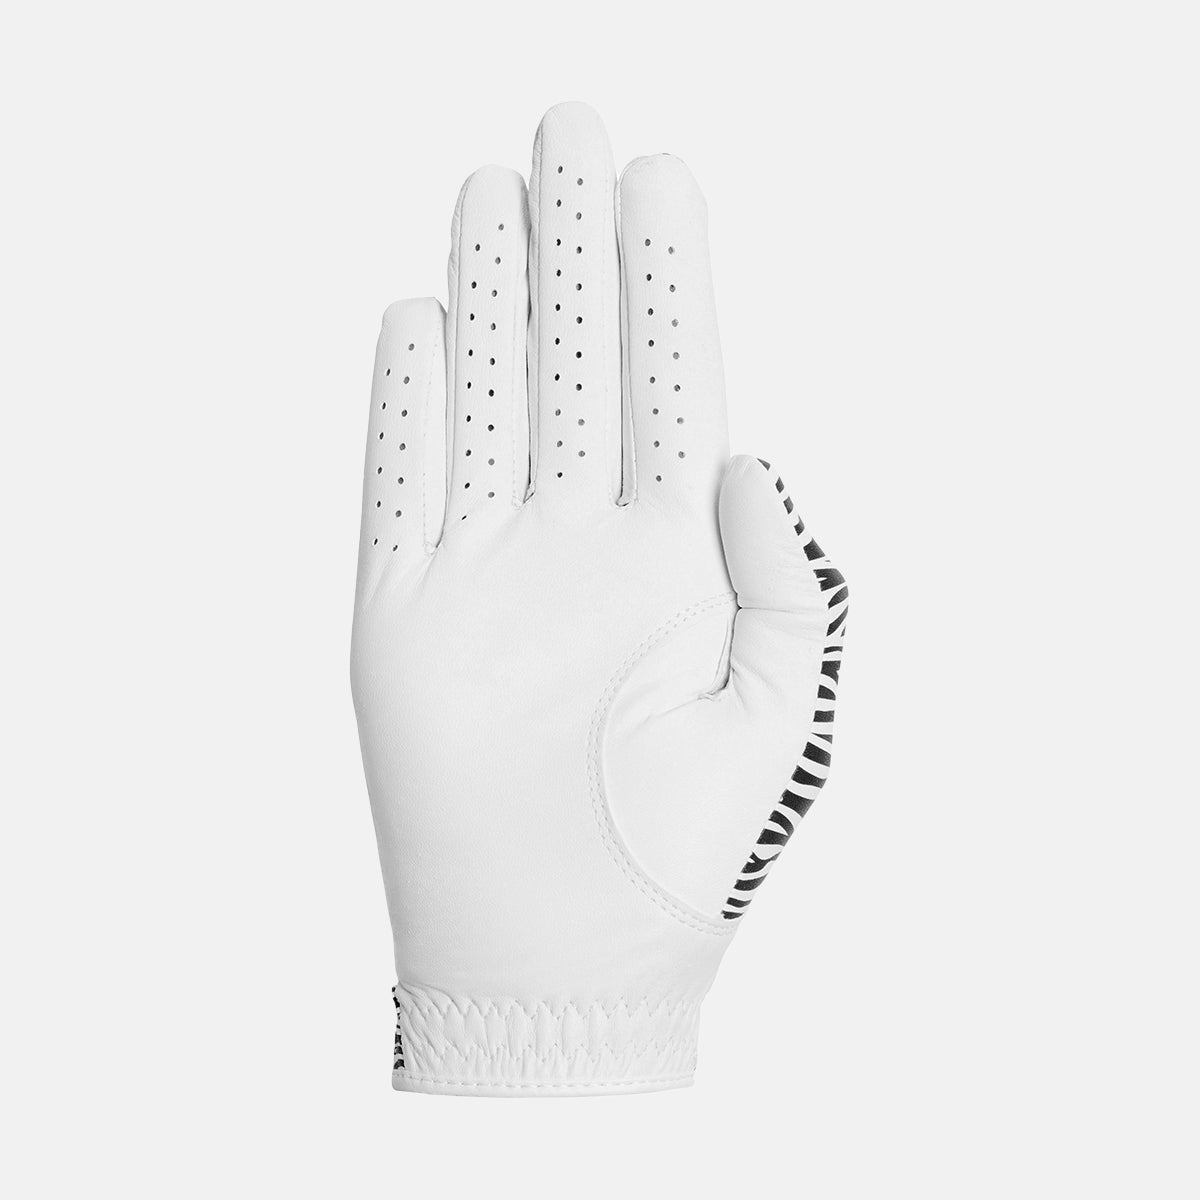 Designer Pro women's golf glove is made with super-soft Cabretta leather and partnered with stretch microfibre leather 